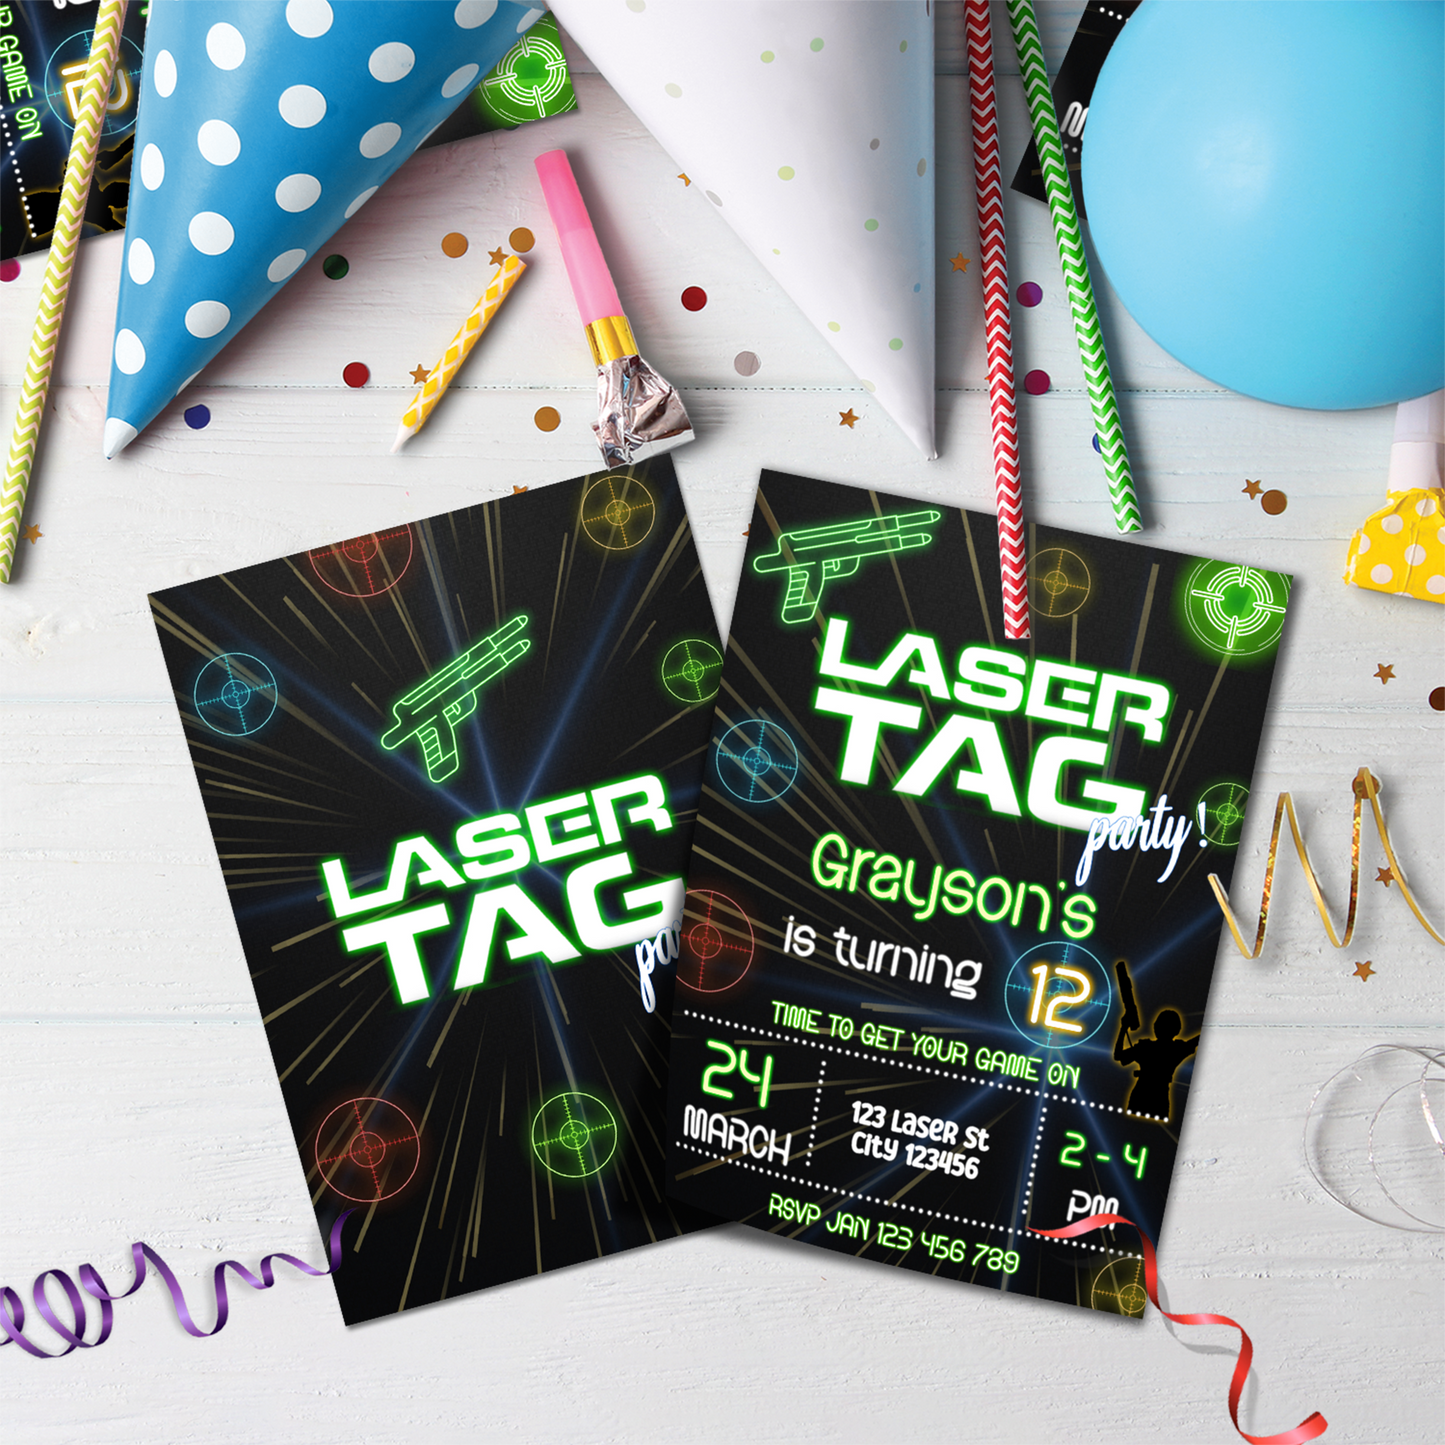 Personalized Birthday Card Invitations for a Laser Tag event